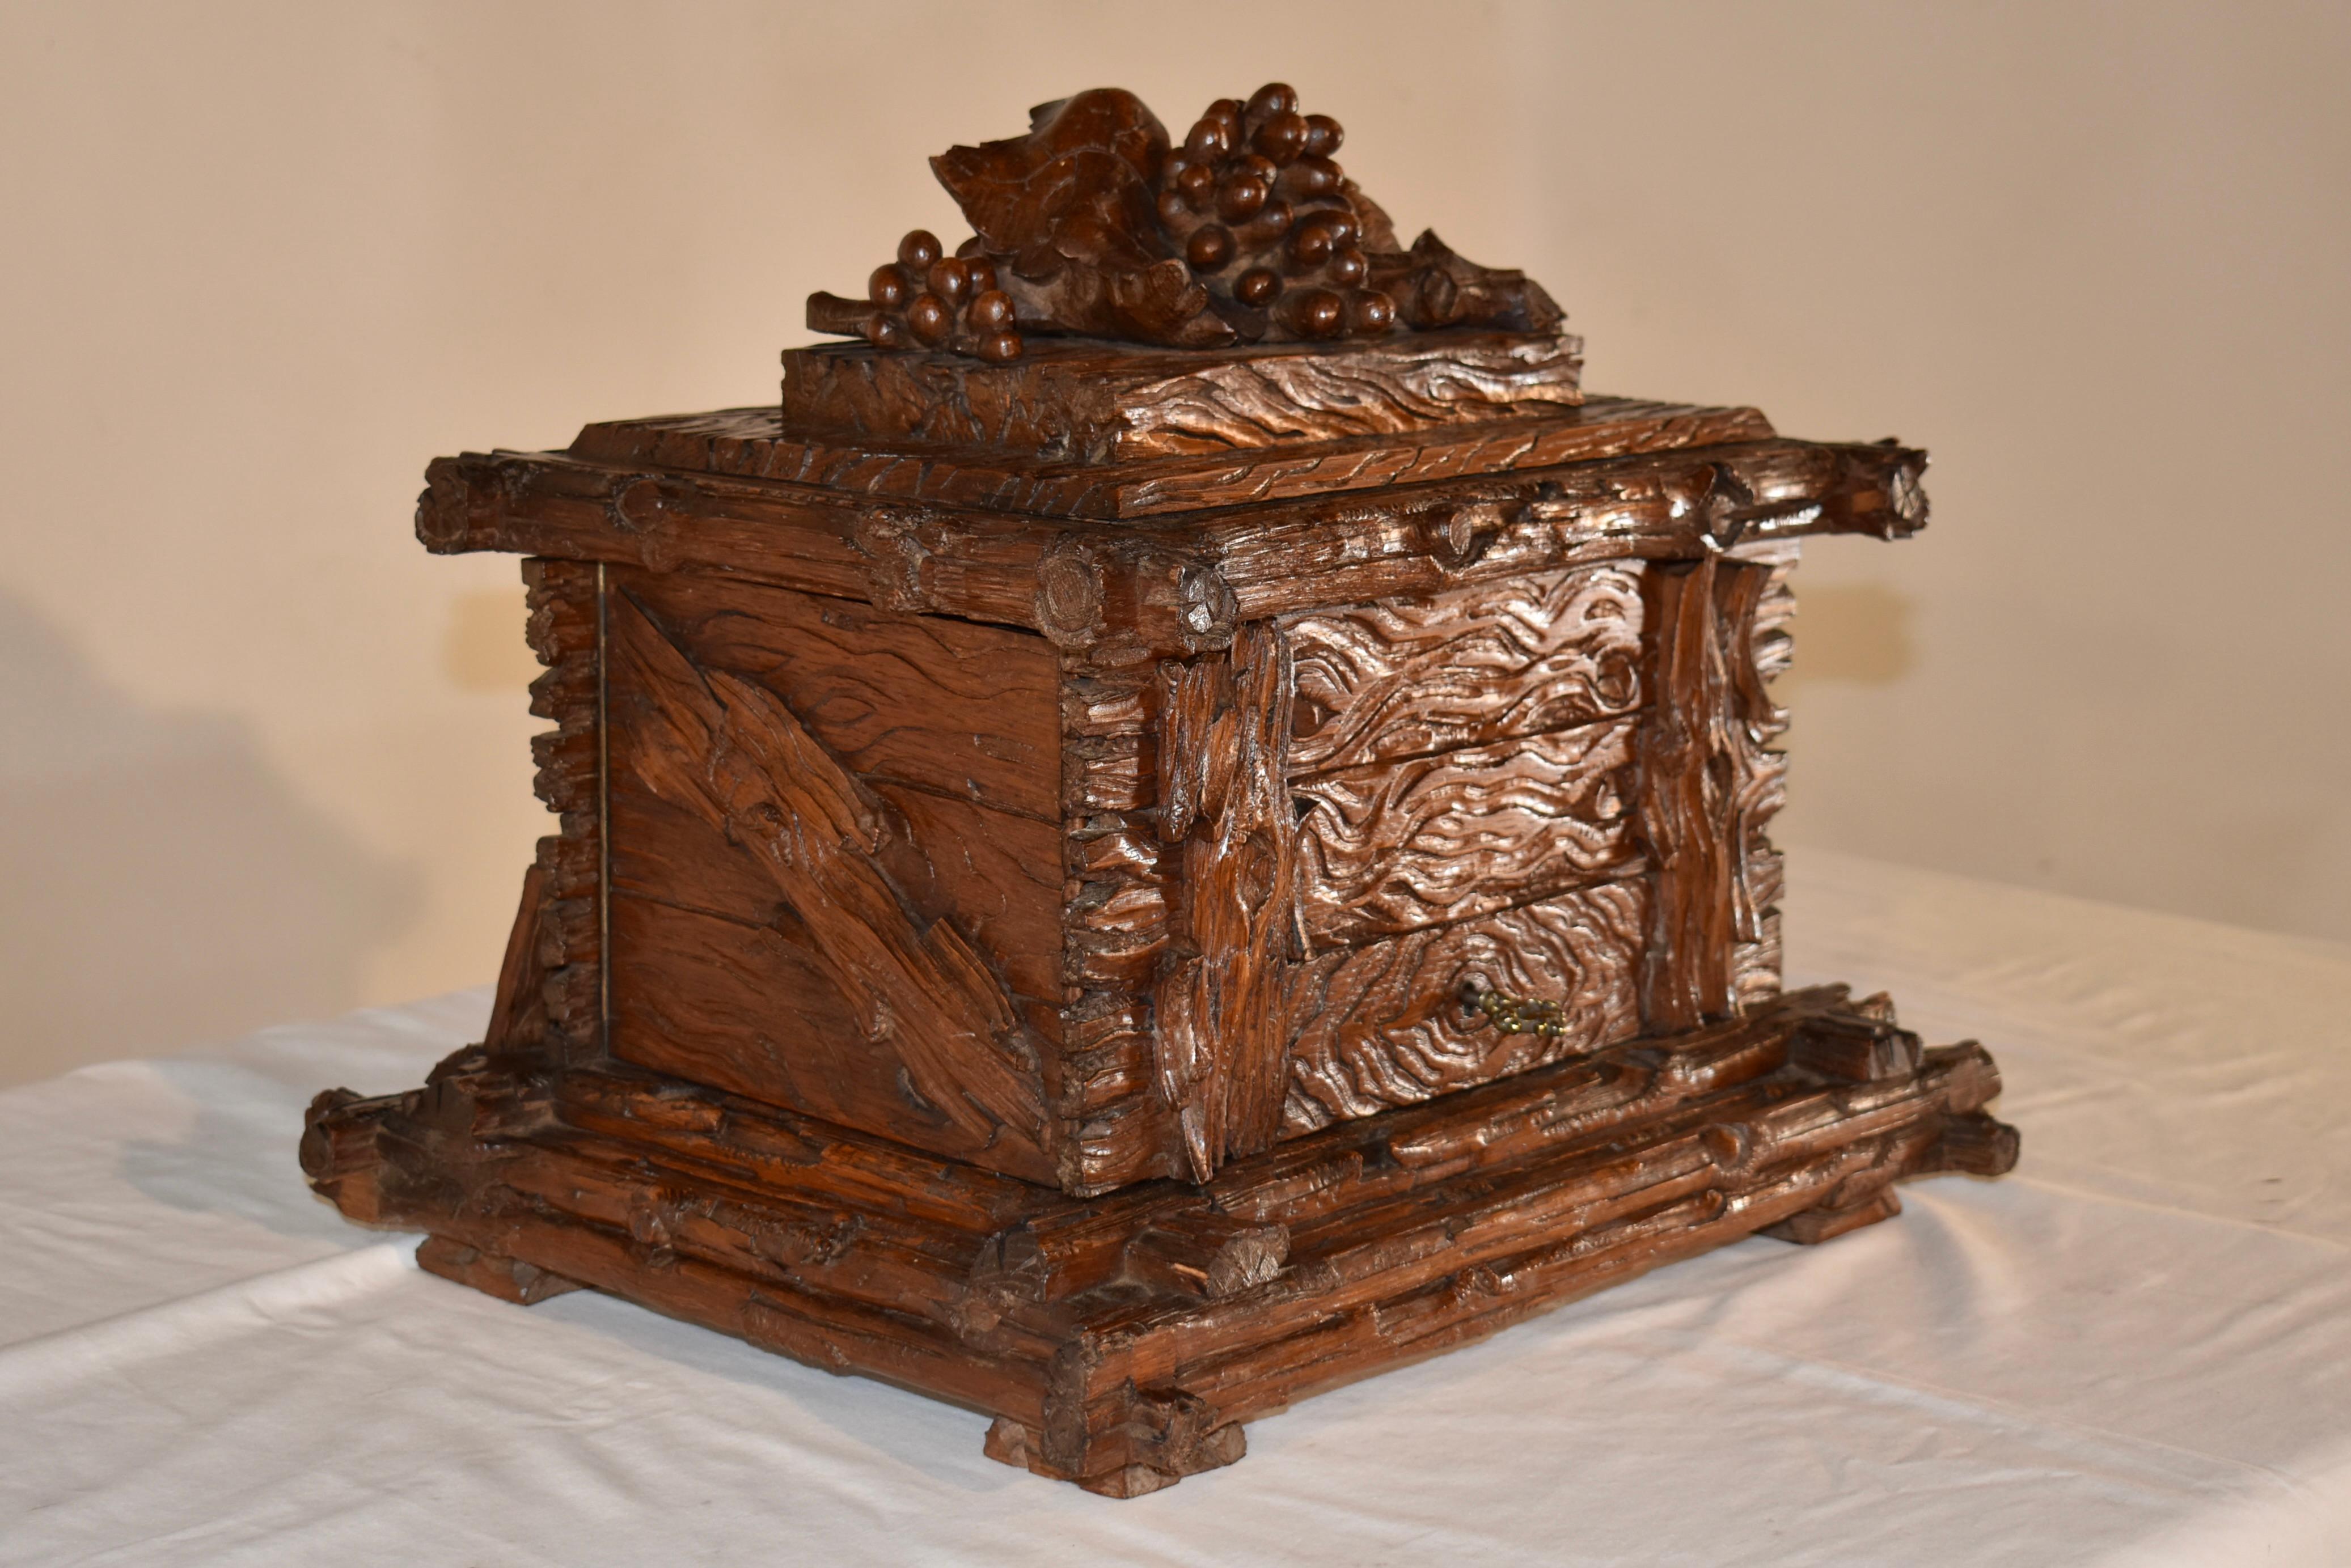 19th Century Black Forest carved liquor set.  The exterior of the box is hand-carved in design as a wood log cabinet, the rectangular Black Forest tantalus is decorated on the top with gorgeous hand carved leaf and grape motifs. Each side, top door